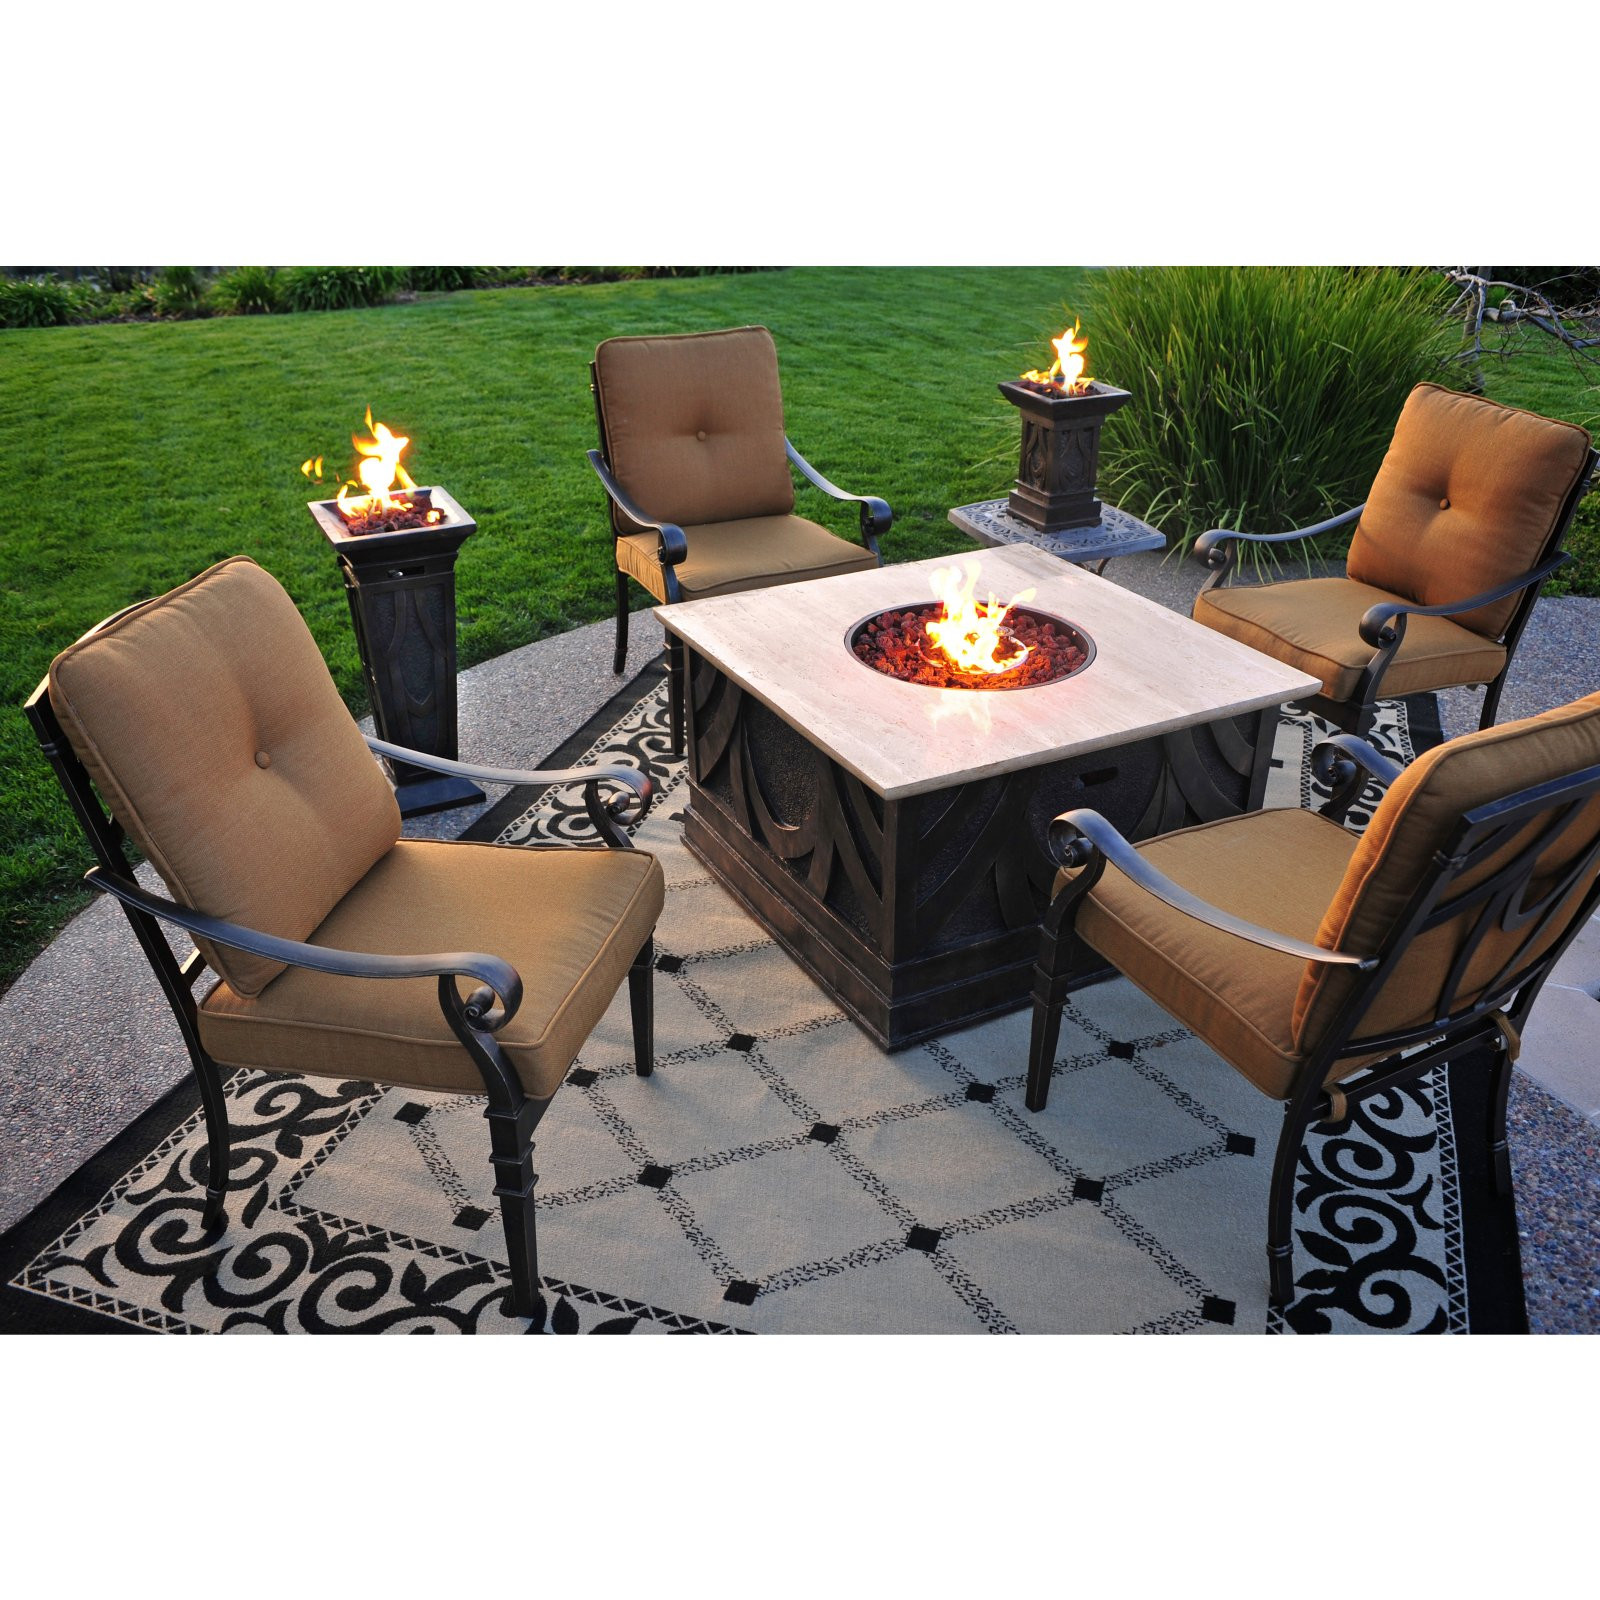 Patio Tables With Fire Pits
 Why Should You Get a Fire Pit Table – thebestoutdoorfirepits